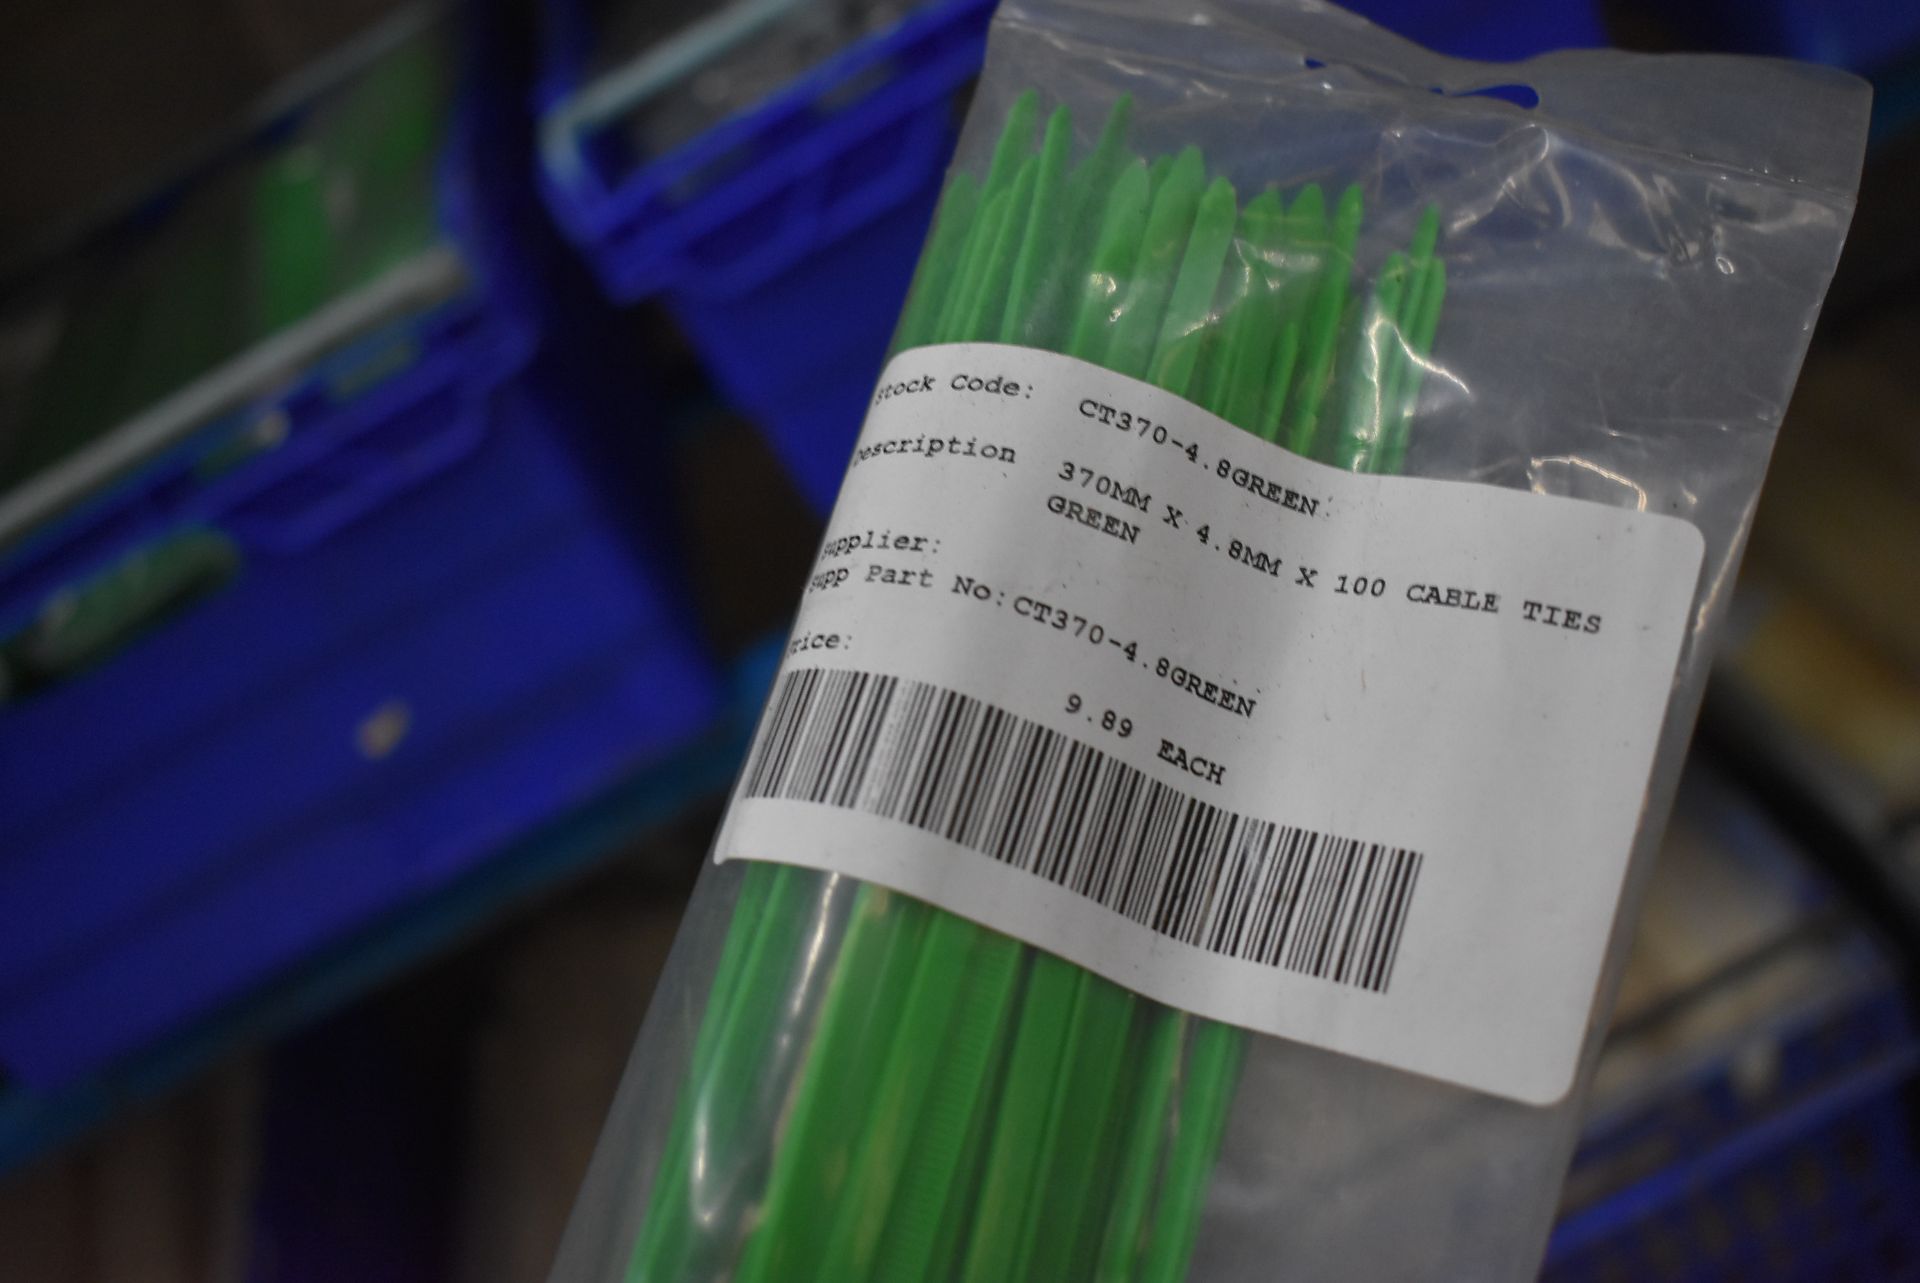 Approx. 40 Bags x 100 370mm x 4.8mm Green Cable Ties, with plastic crate - Image 3 of 3